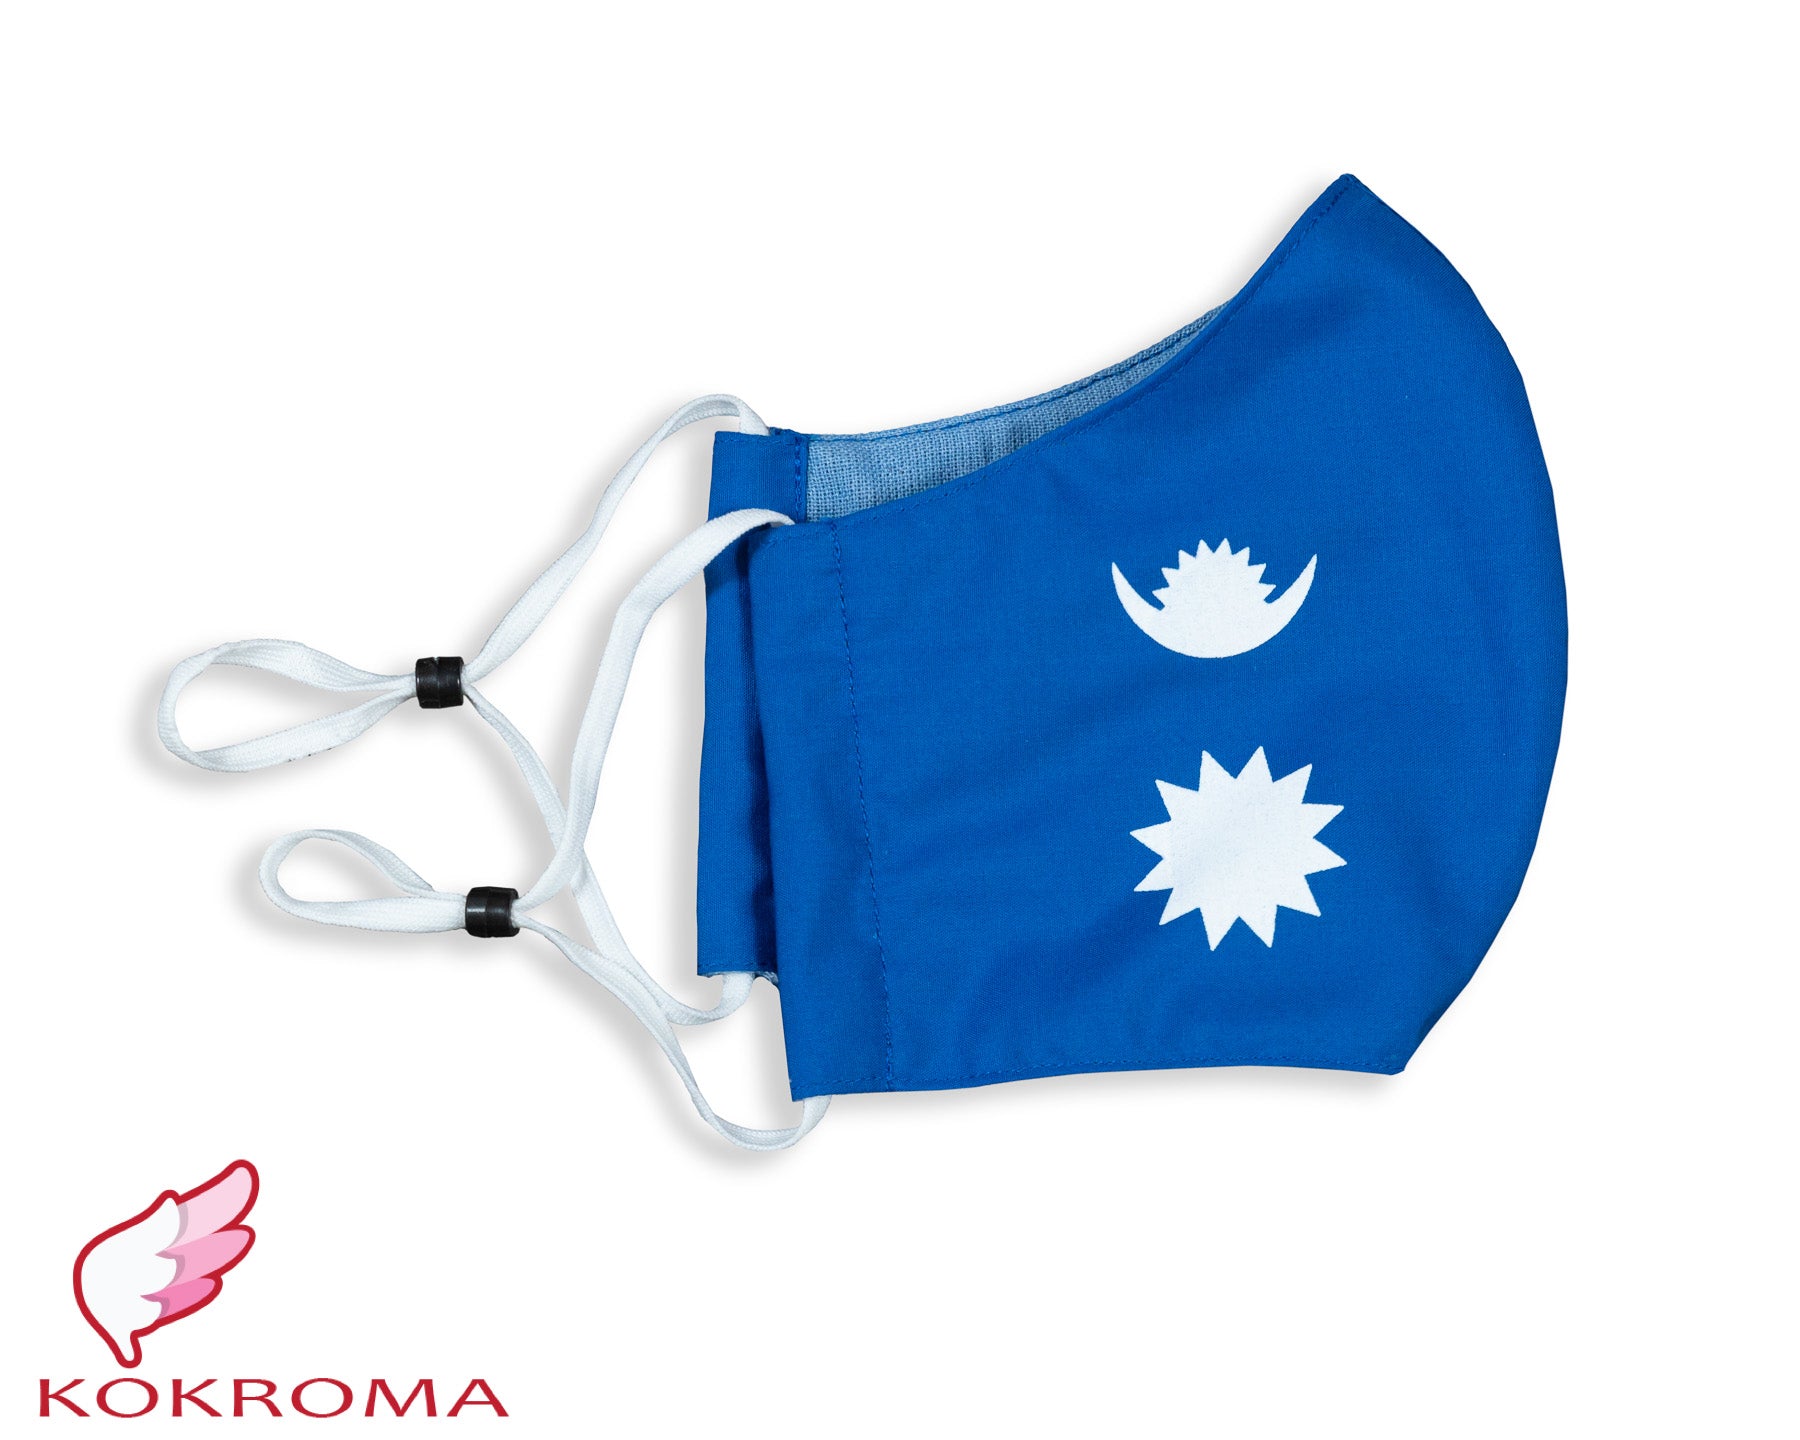 Our Nepali Flag masks have been protecting our customers since the start of Covid-19. To date we have made hundreds of thousands of cotton 3 layer masks and now our NEW model comes in an assortment of bright colours to match your clothes on any occasion.